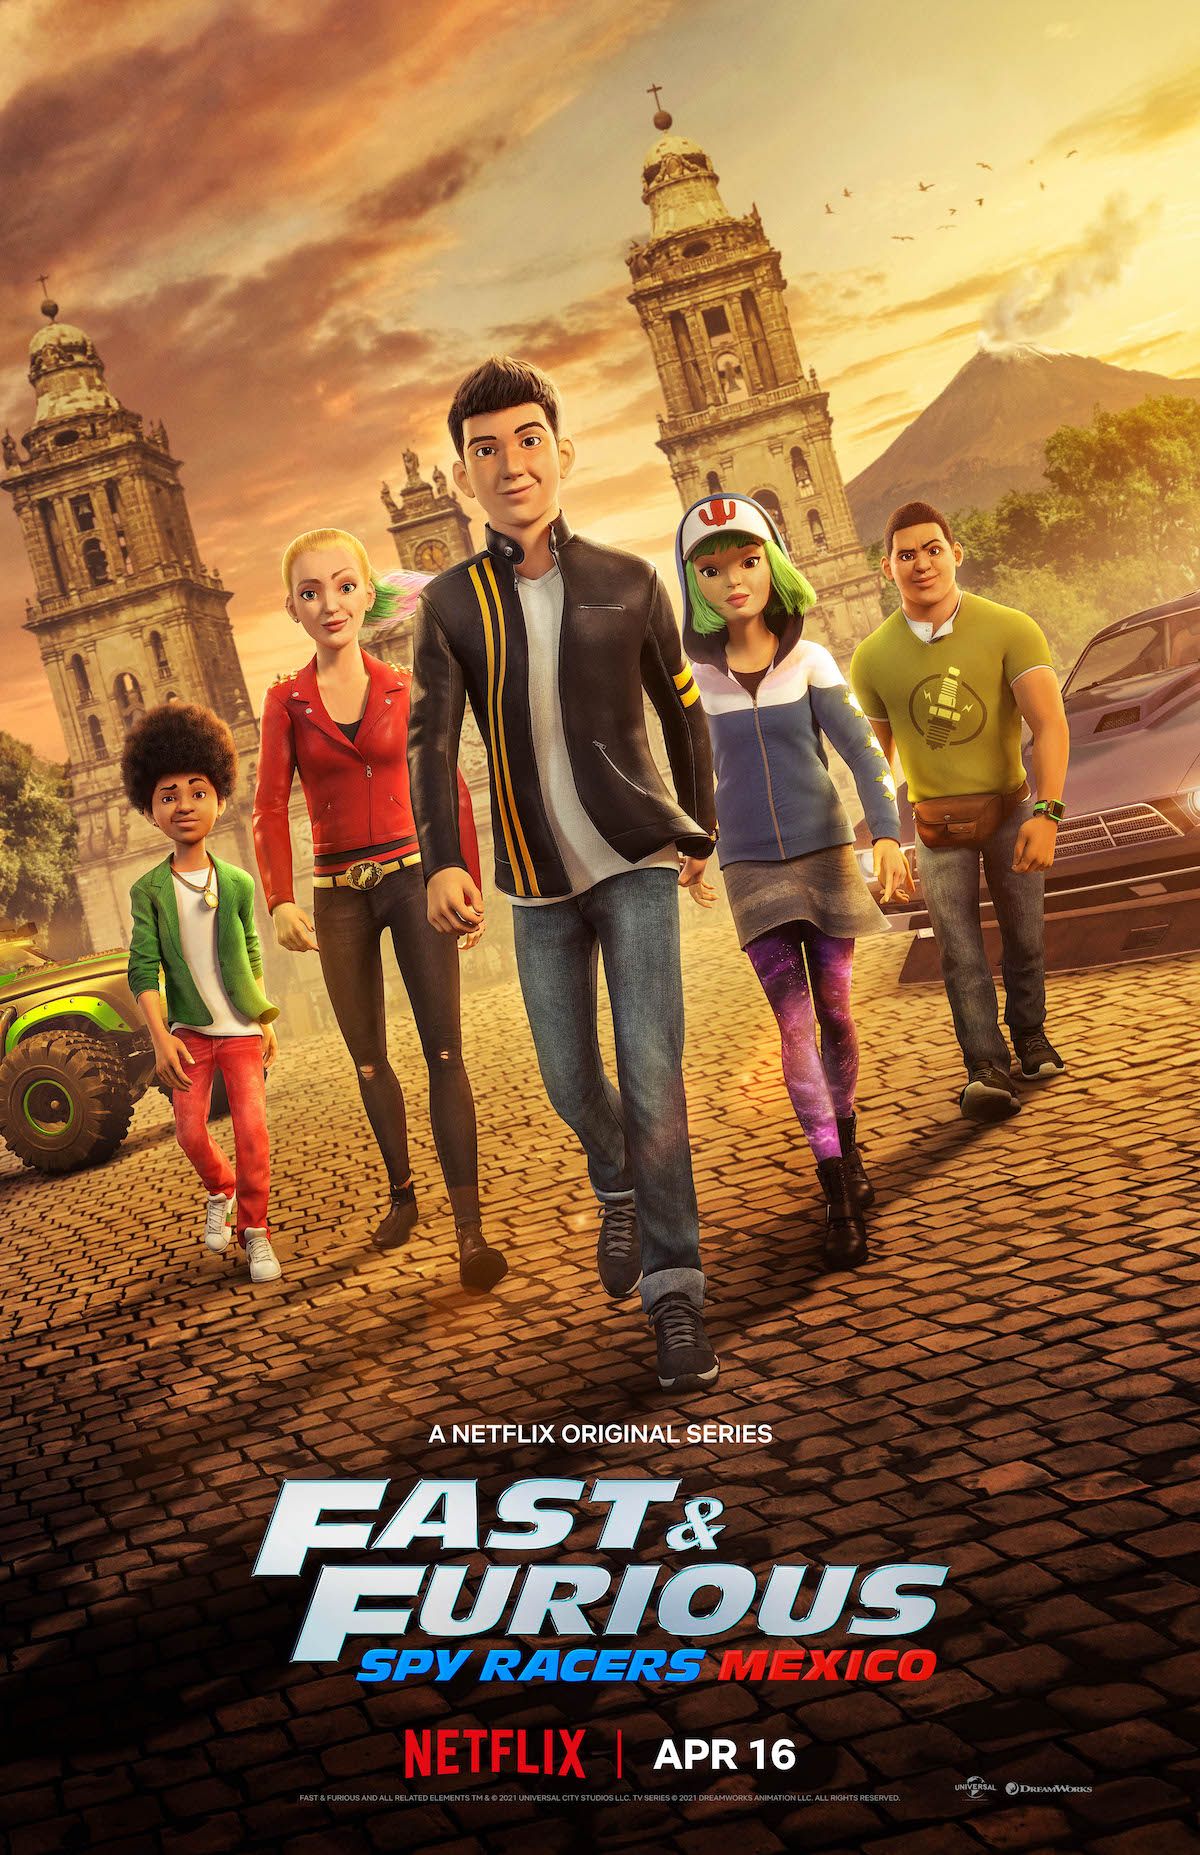 Fast &amp; Furious: Spy Racers Mexico Netflix DreamWorks poster